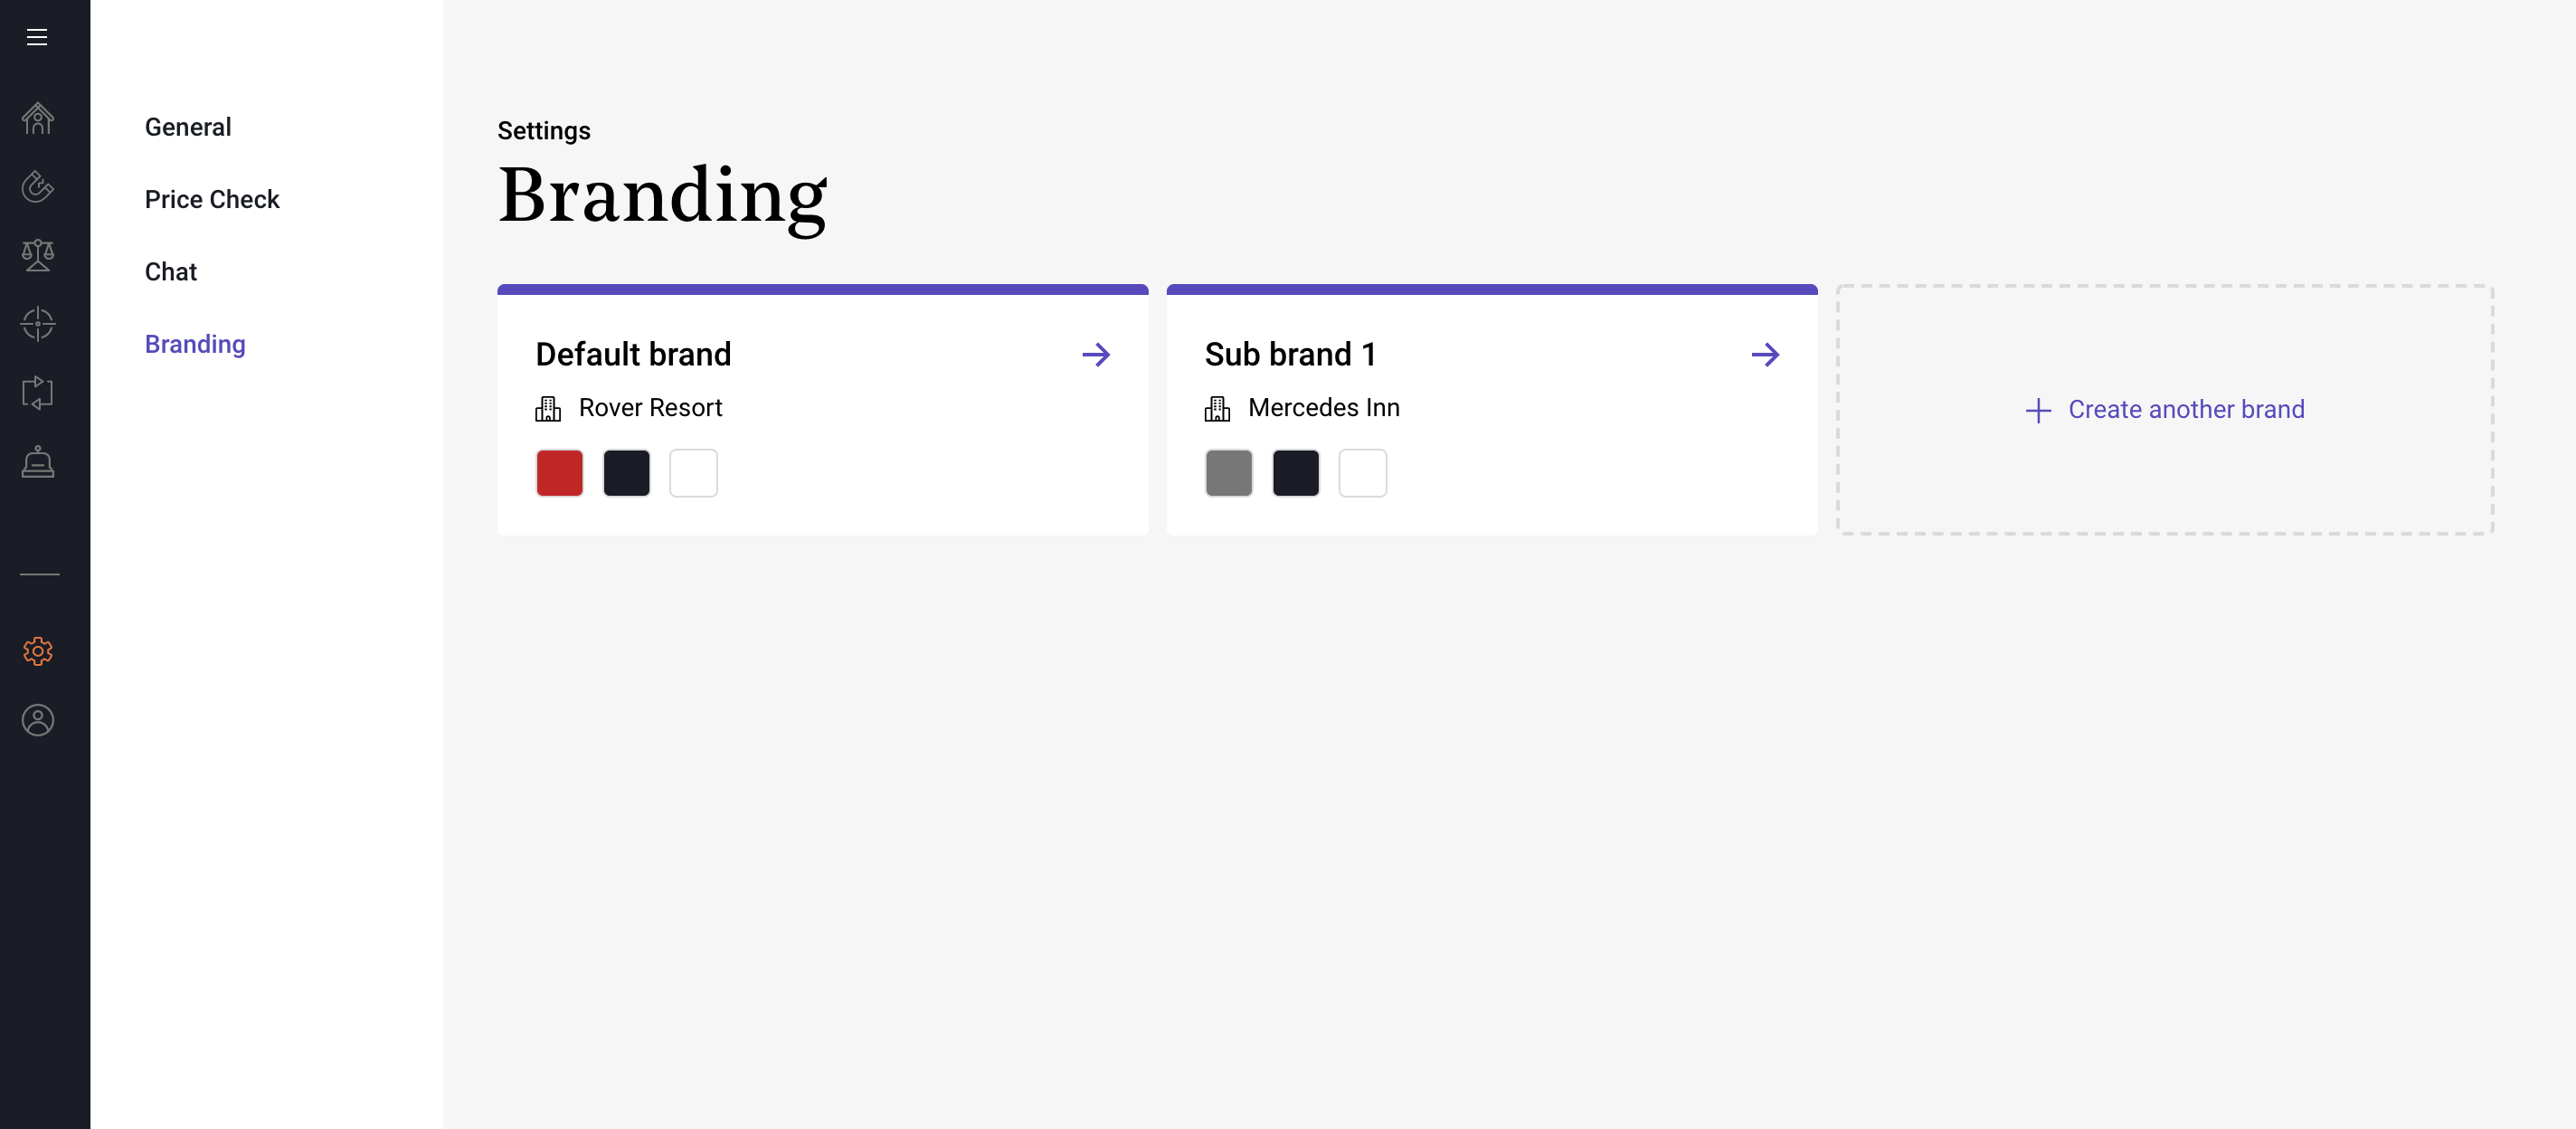 A screenshot of the Triptease Platform 'Branding' page within the 'Settings' section, showing the option to upload both a 'Default brand' and multiple 'Sub brands' for Targeted Messages